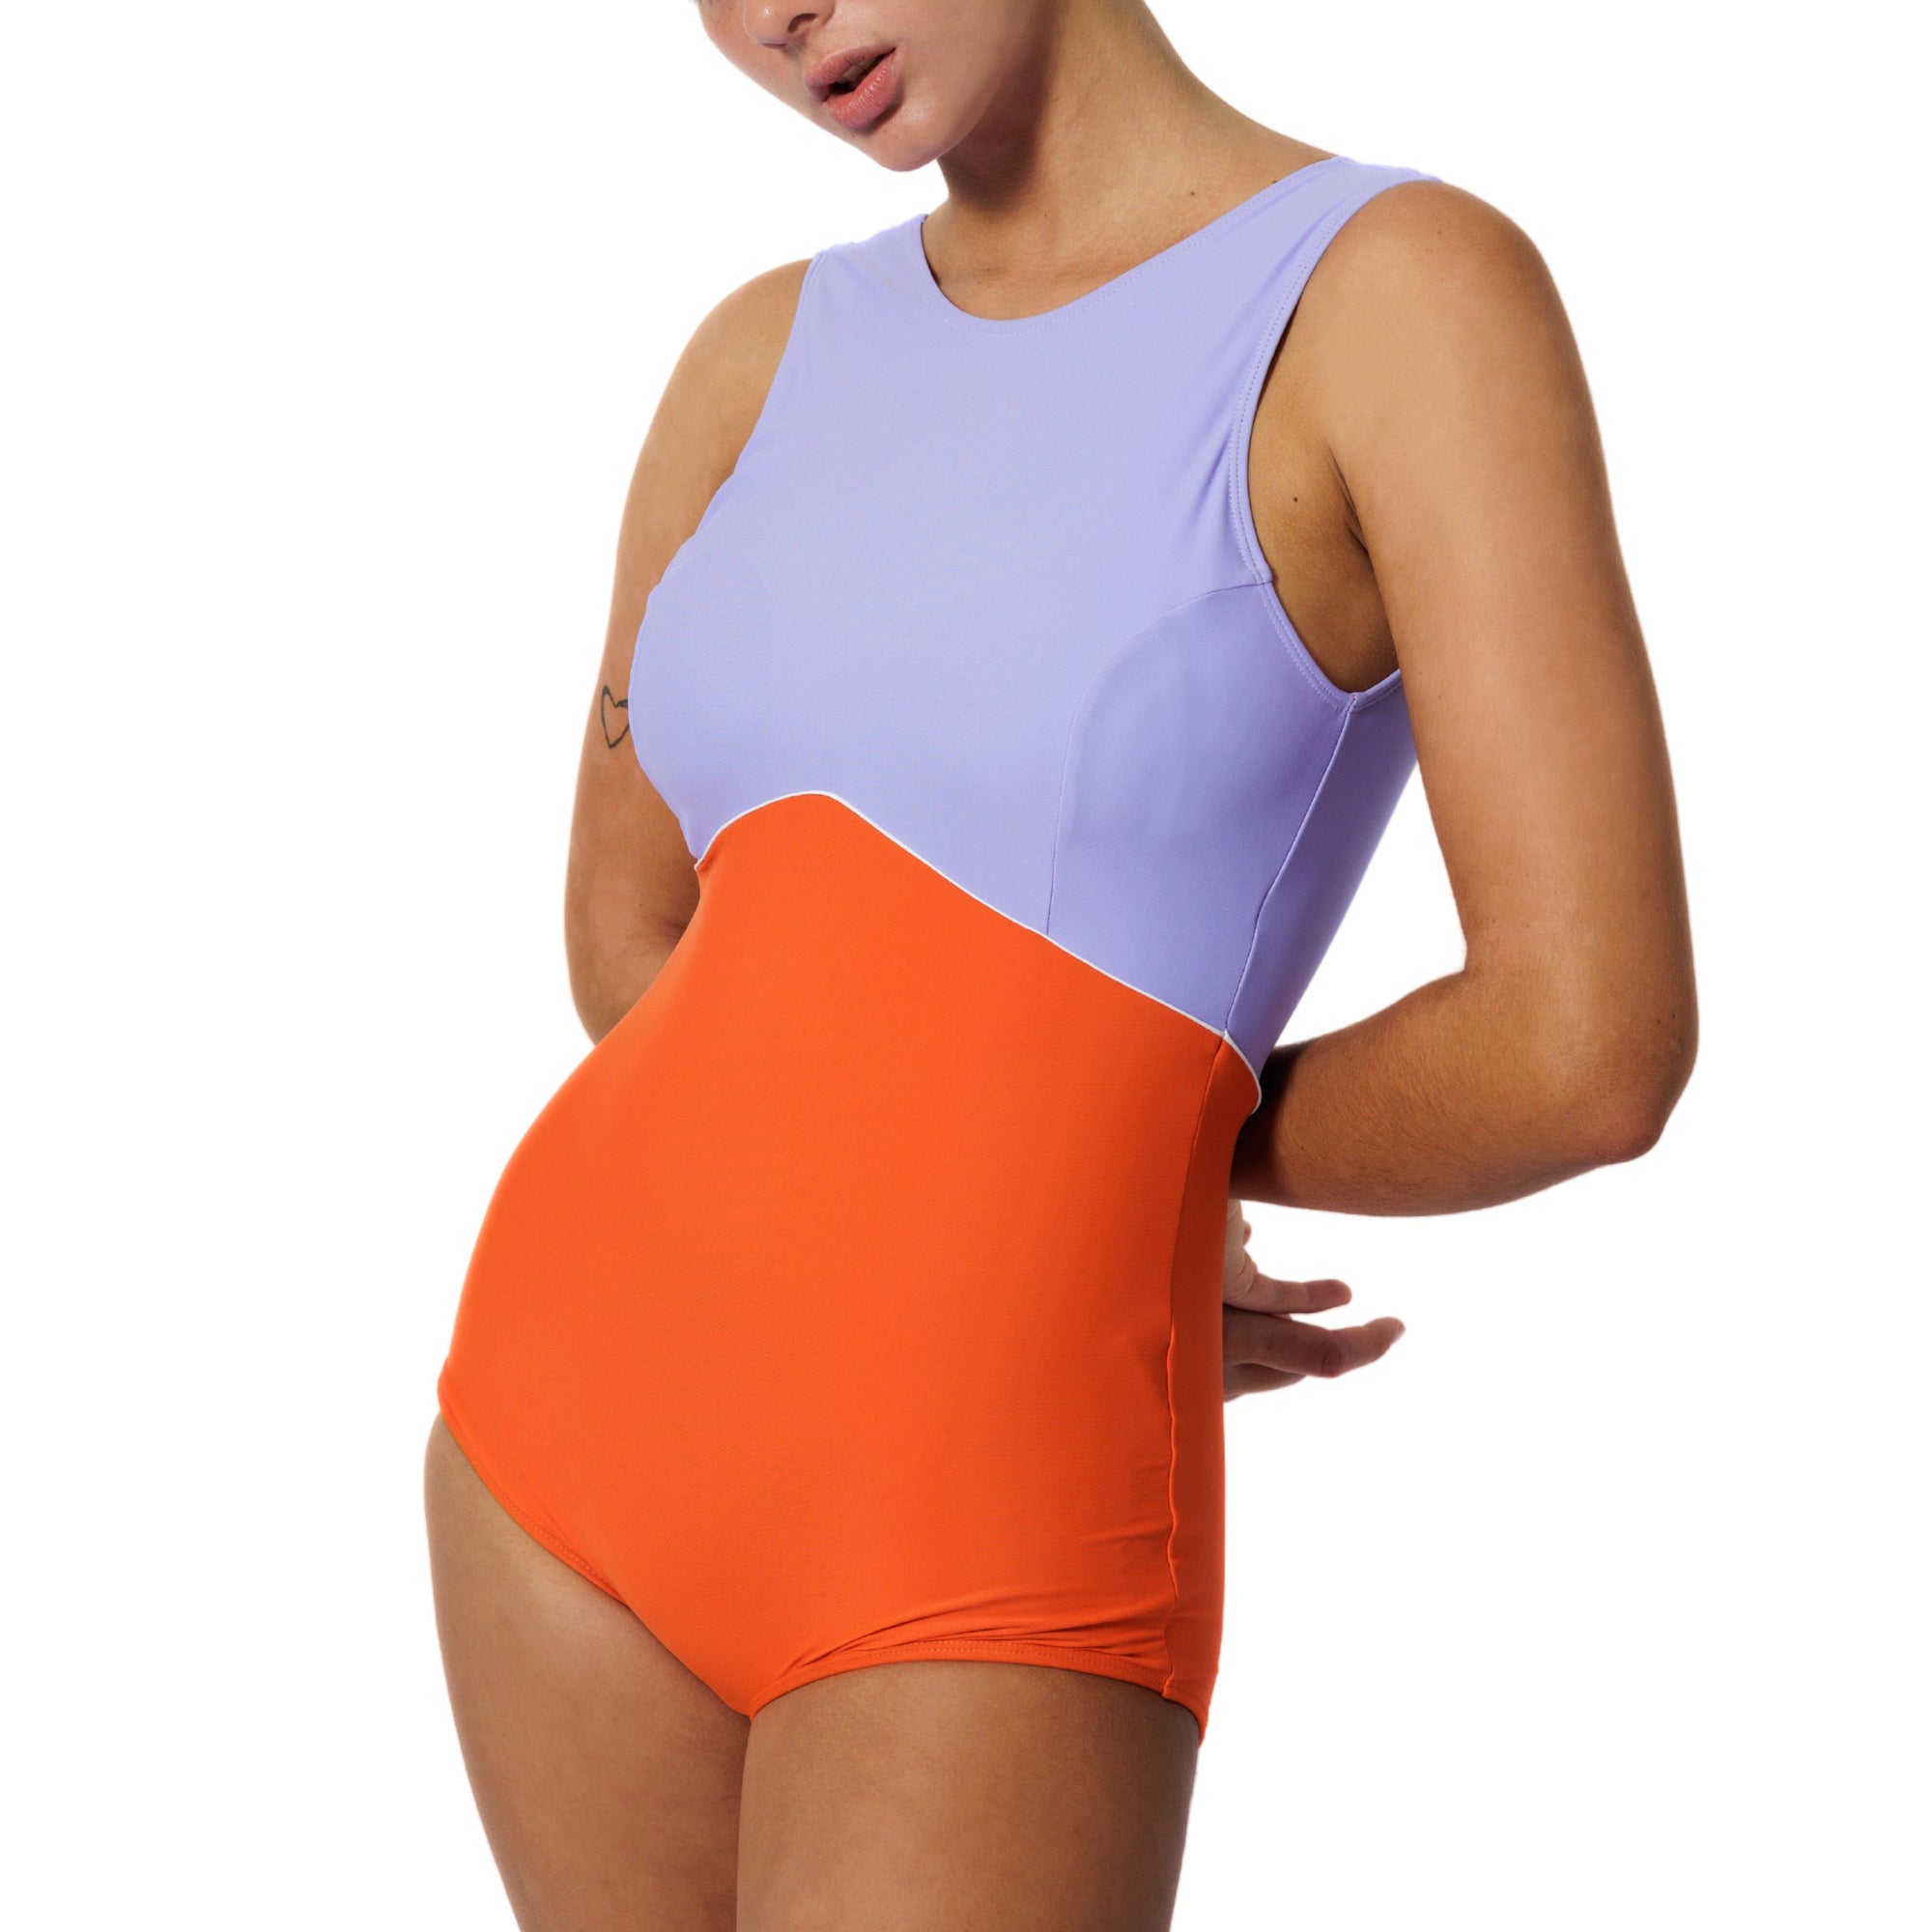 Lore of the Sea - Women Sustainable Swimsuits, Wetsuits, Rash Guards